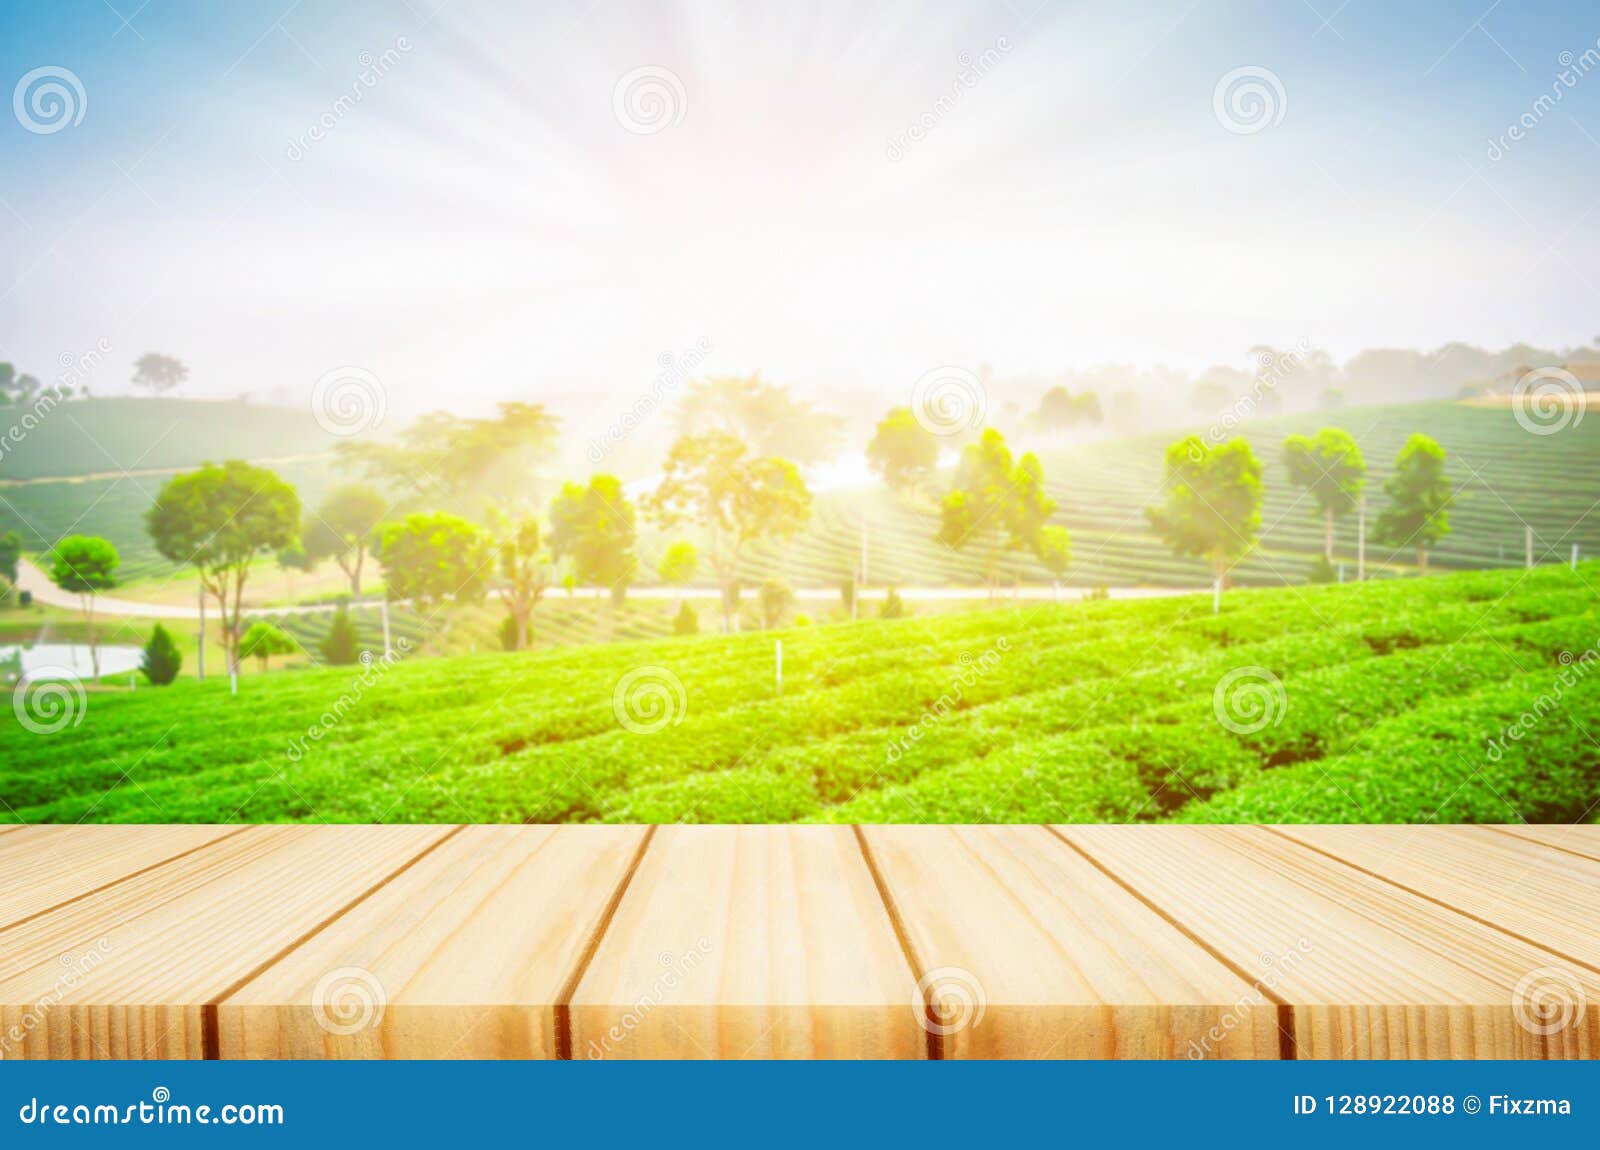 671 Wooden Table Tea Tea Plantation Background Stock Photos - Free &  Royalty-Free Stock Photos from Dreamstime